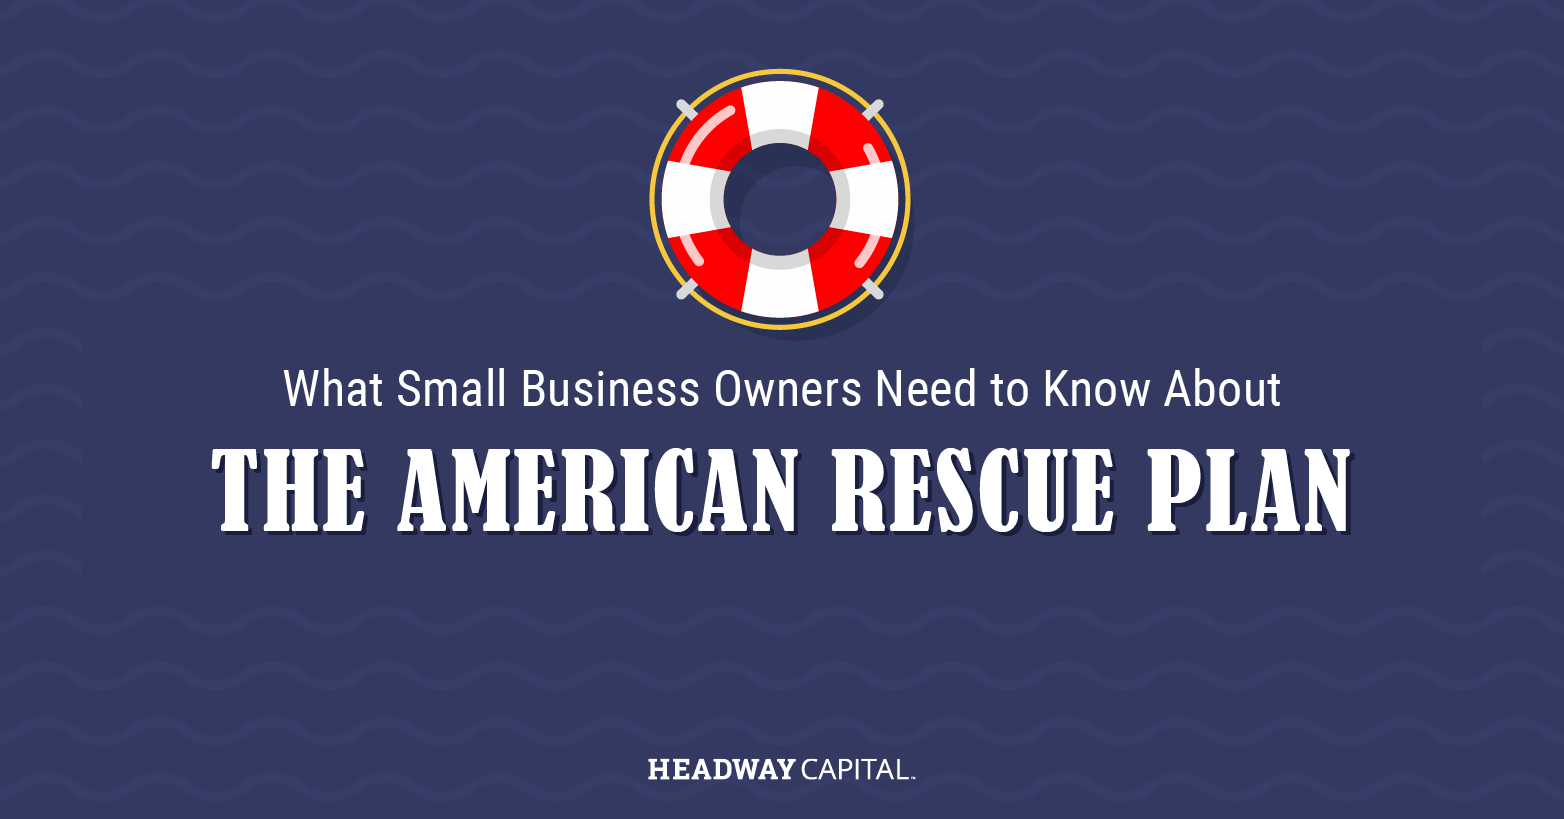 How Does the American Rescue Plan Help My Small Business?